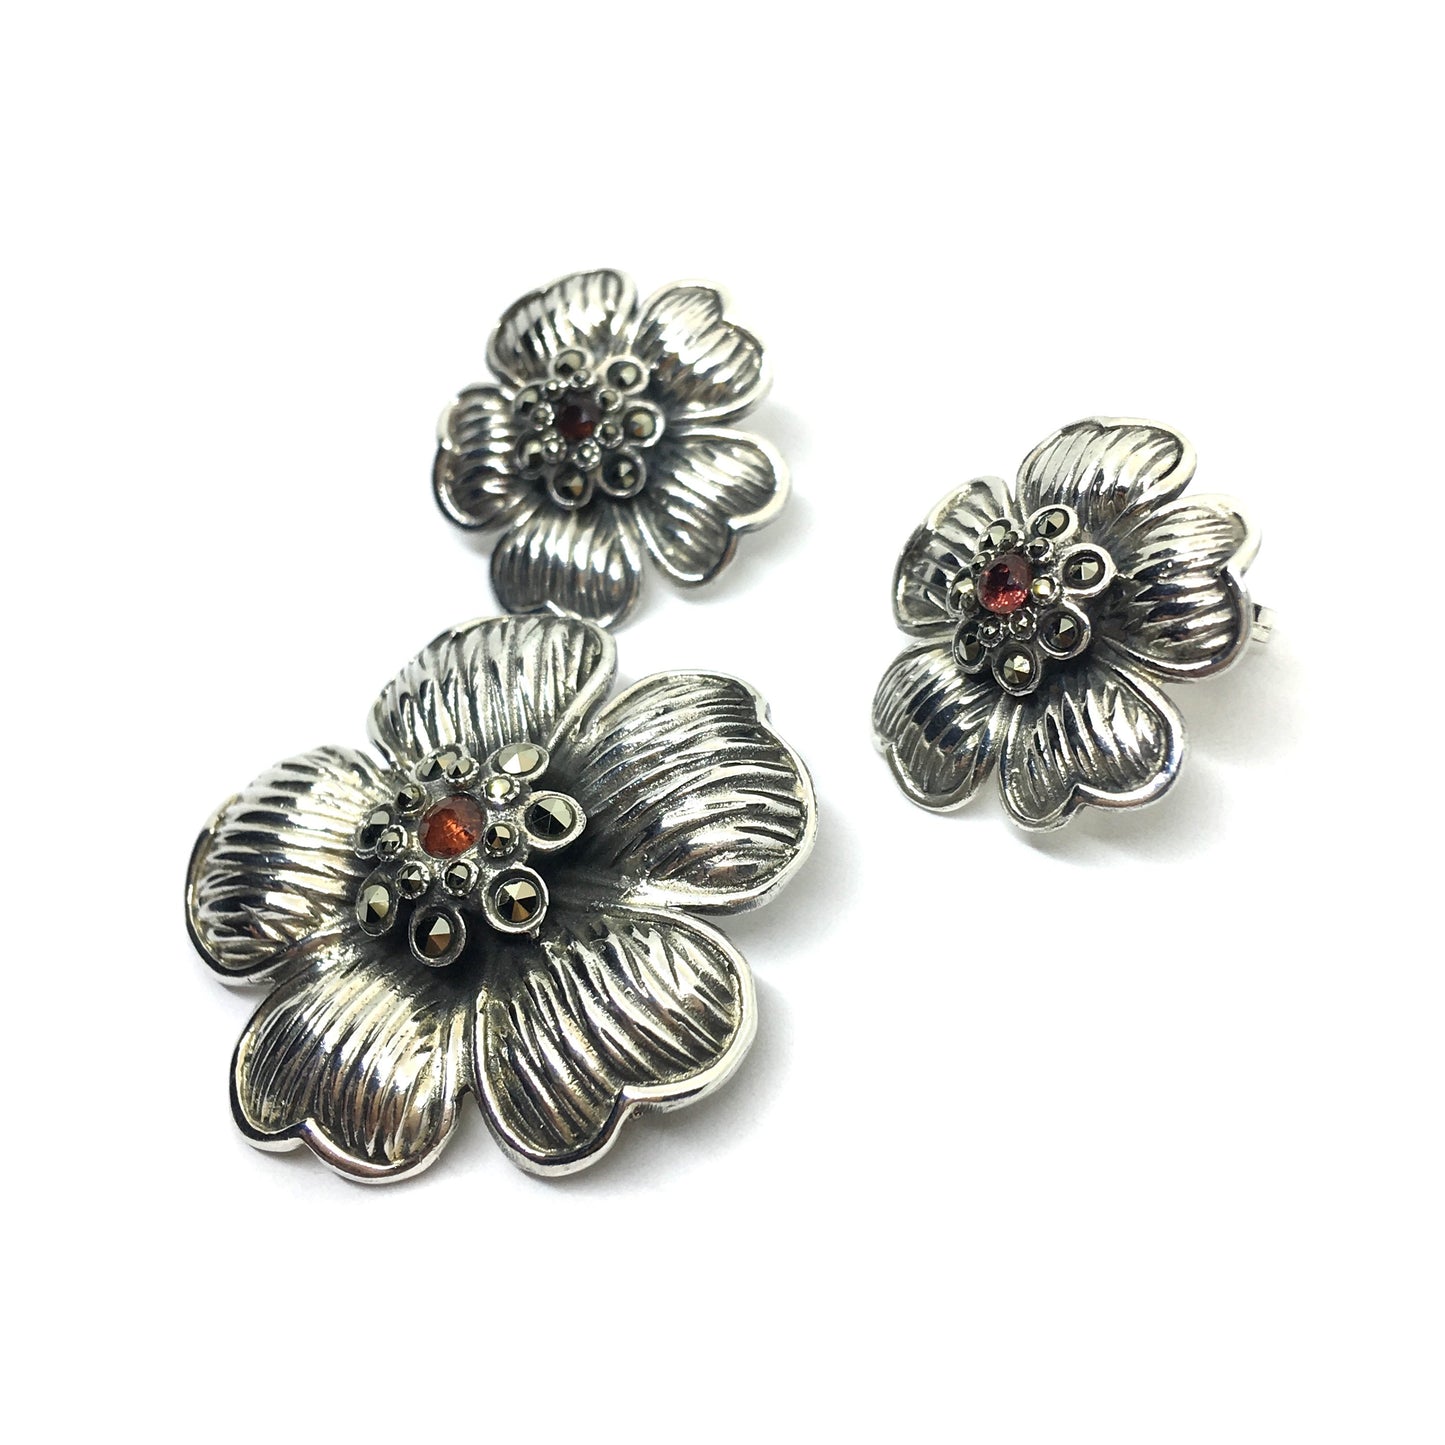 Brooches & Lapel Pins - Sterling Silver Garnet Dogwood Matching Jewelry set - Pre-owned Flower Brooch & Earrings - Marcasite Stone Pin - Blingschlingers Jewelry